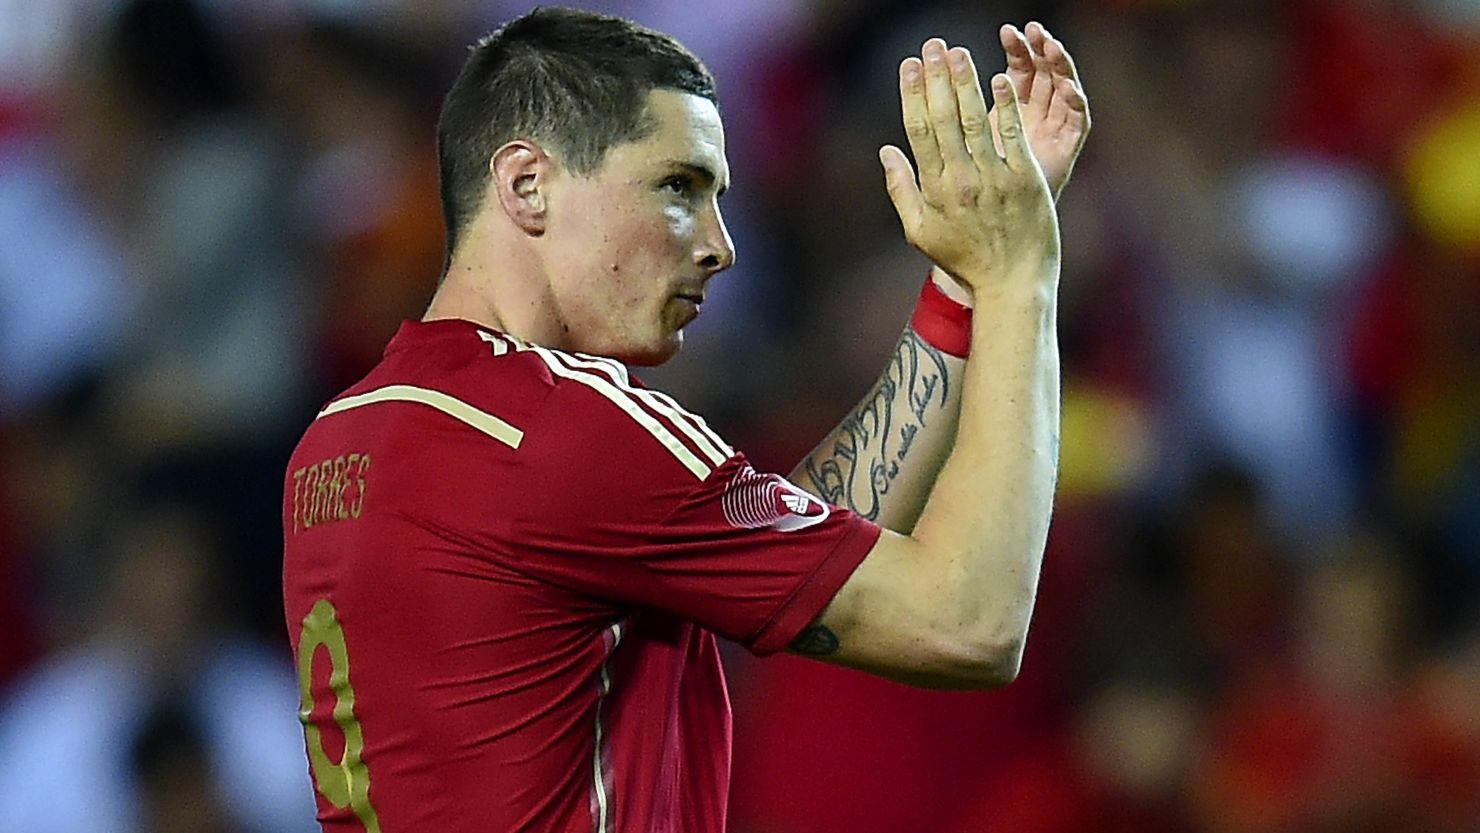 Fernando Torres applauds the crowd after being substituted in Spain's 2-0 win over Bolivia in Sevilla.